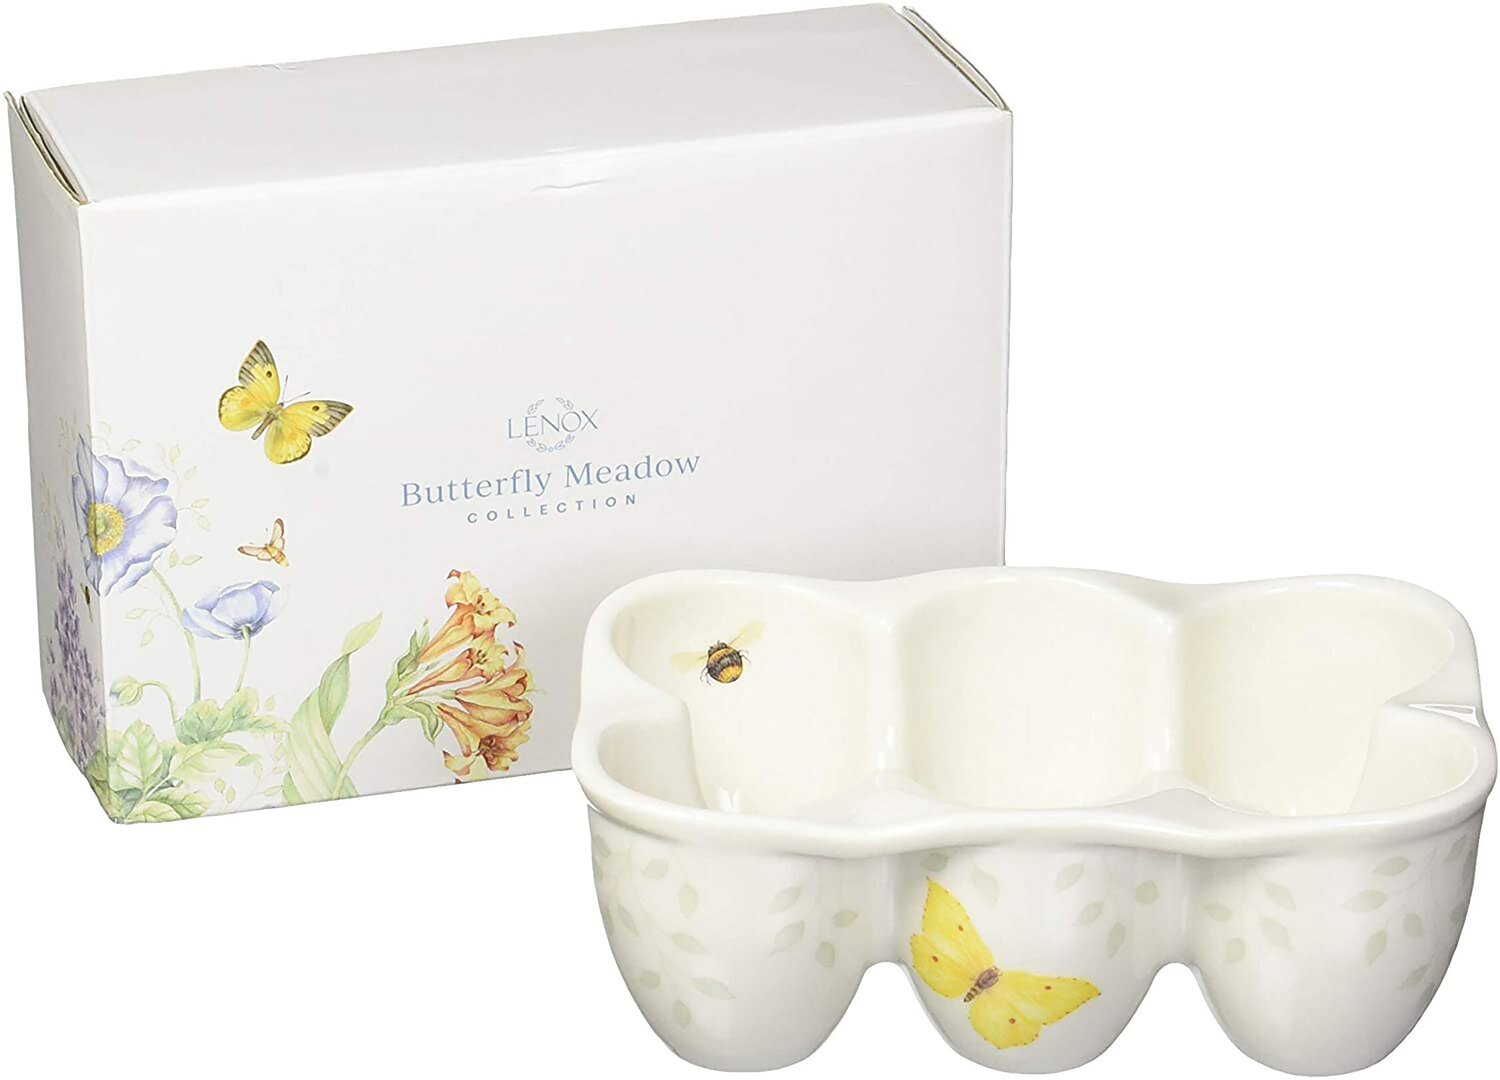 Lenox Butterfly Meadow Kitchen Egg Crate 890447